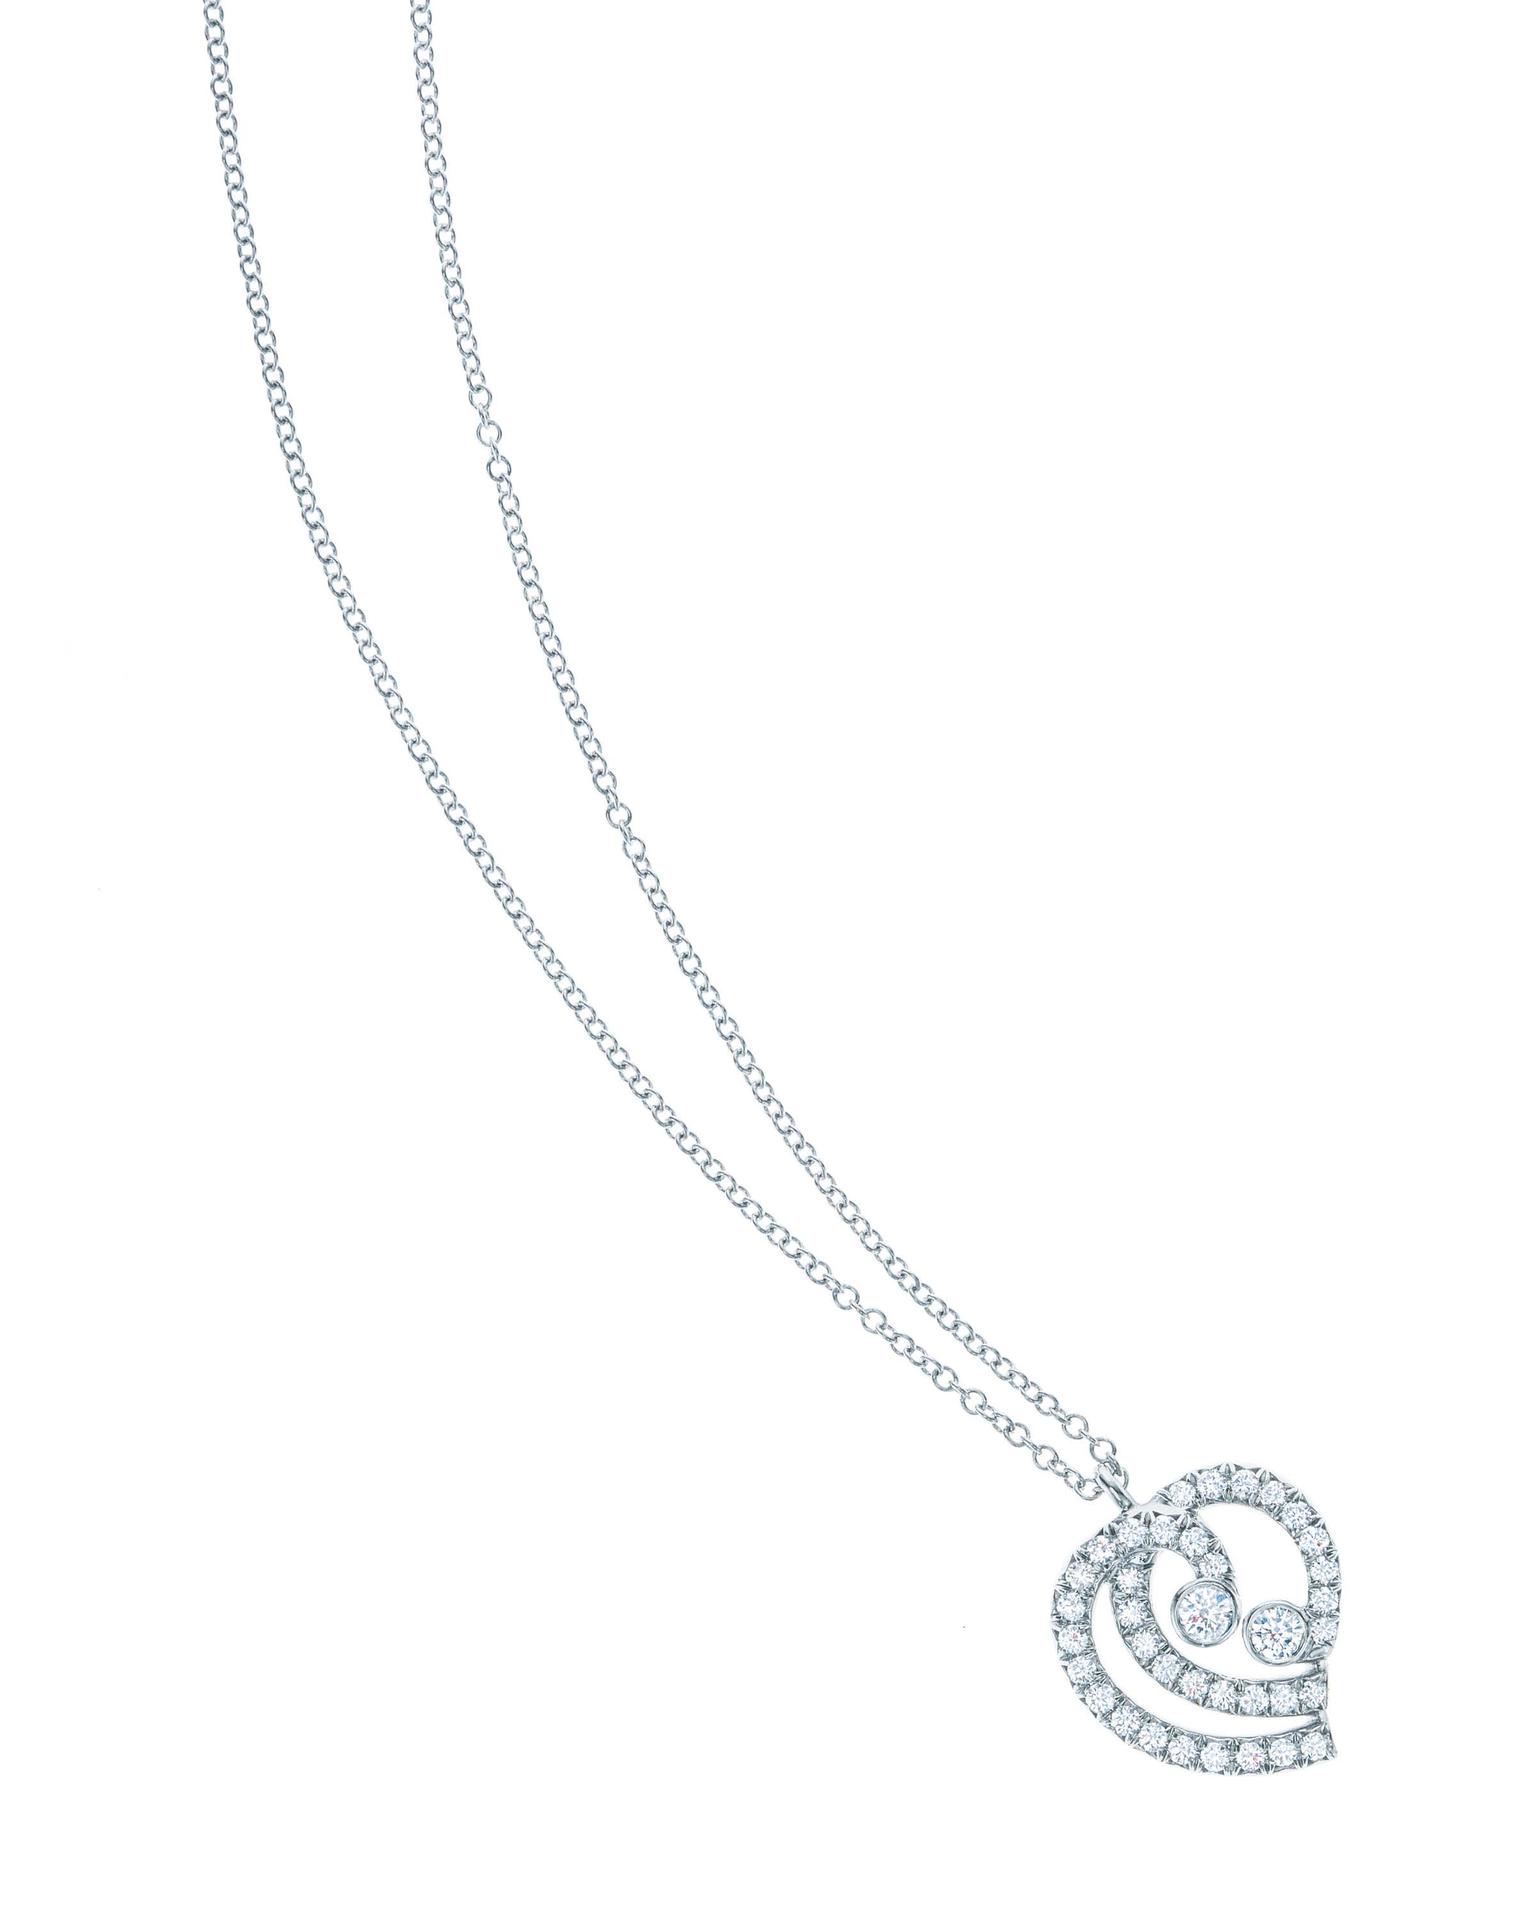 Tiffany Enchant heart pendant in platinum with diamonds from £2,025.